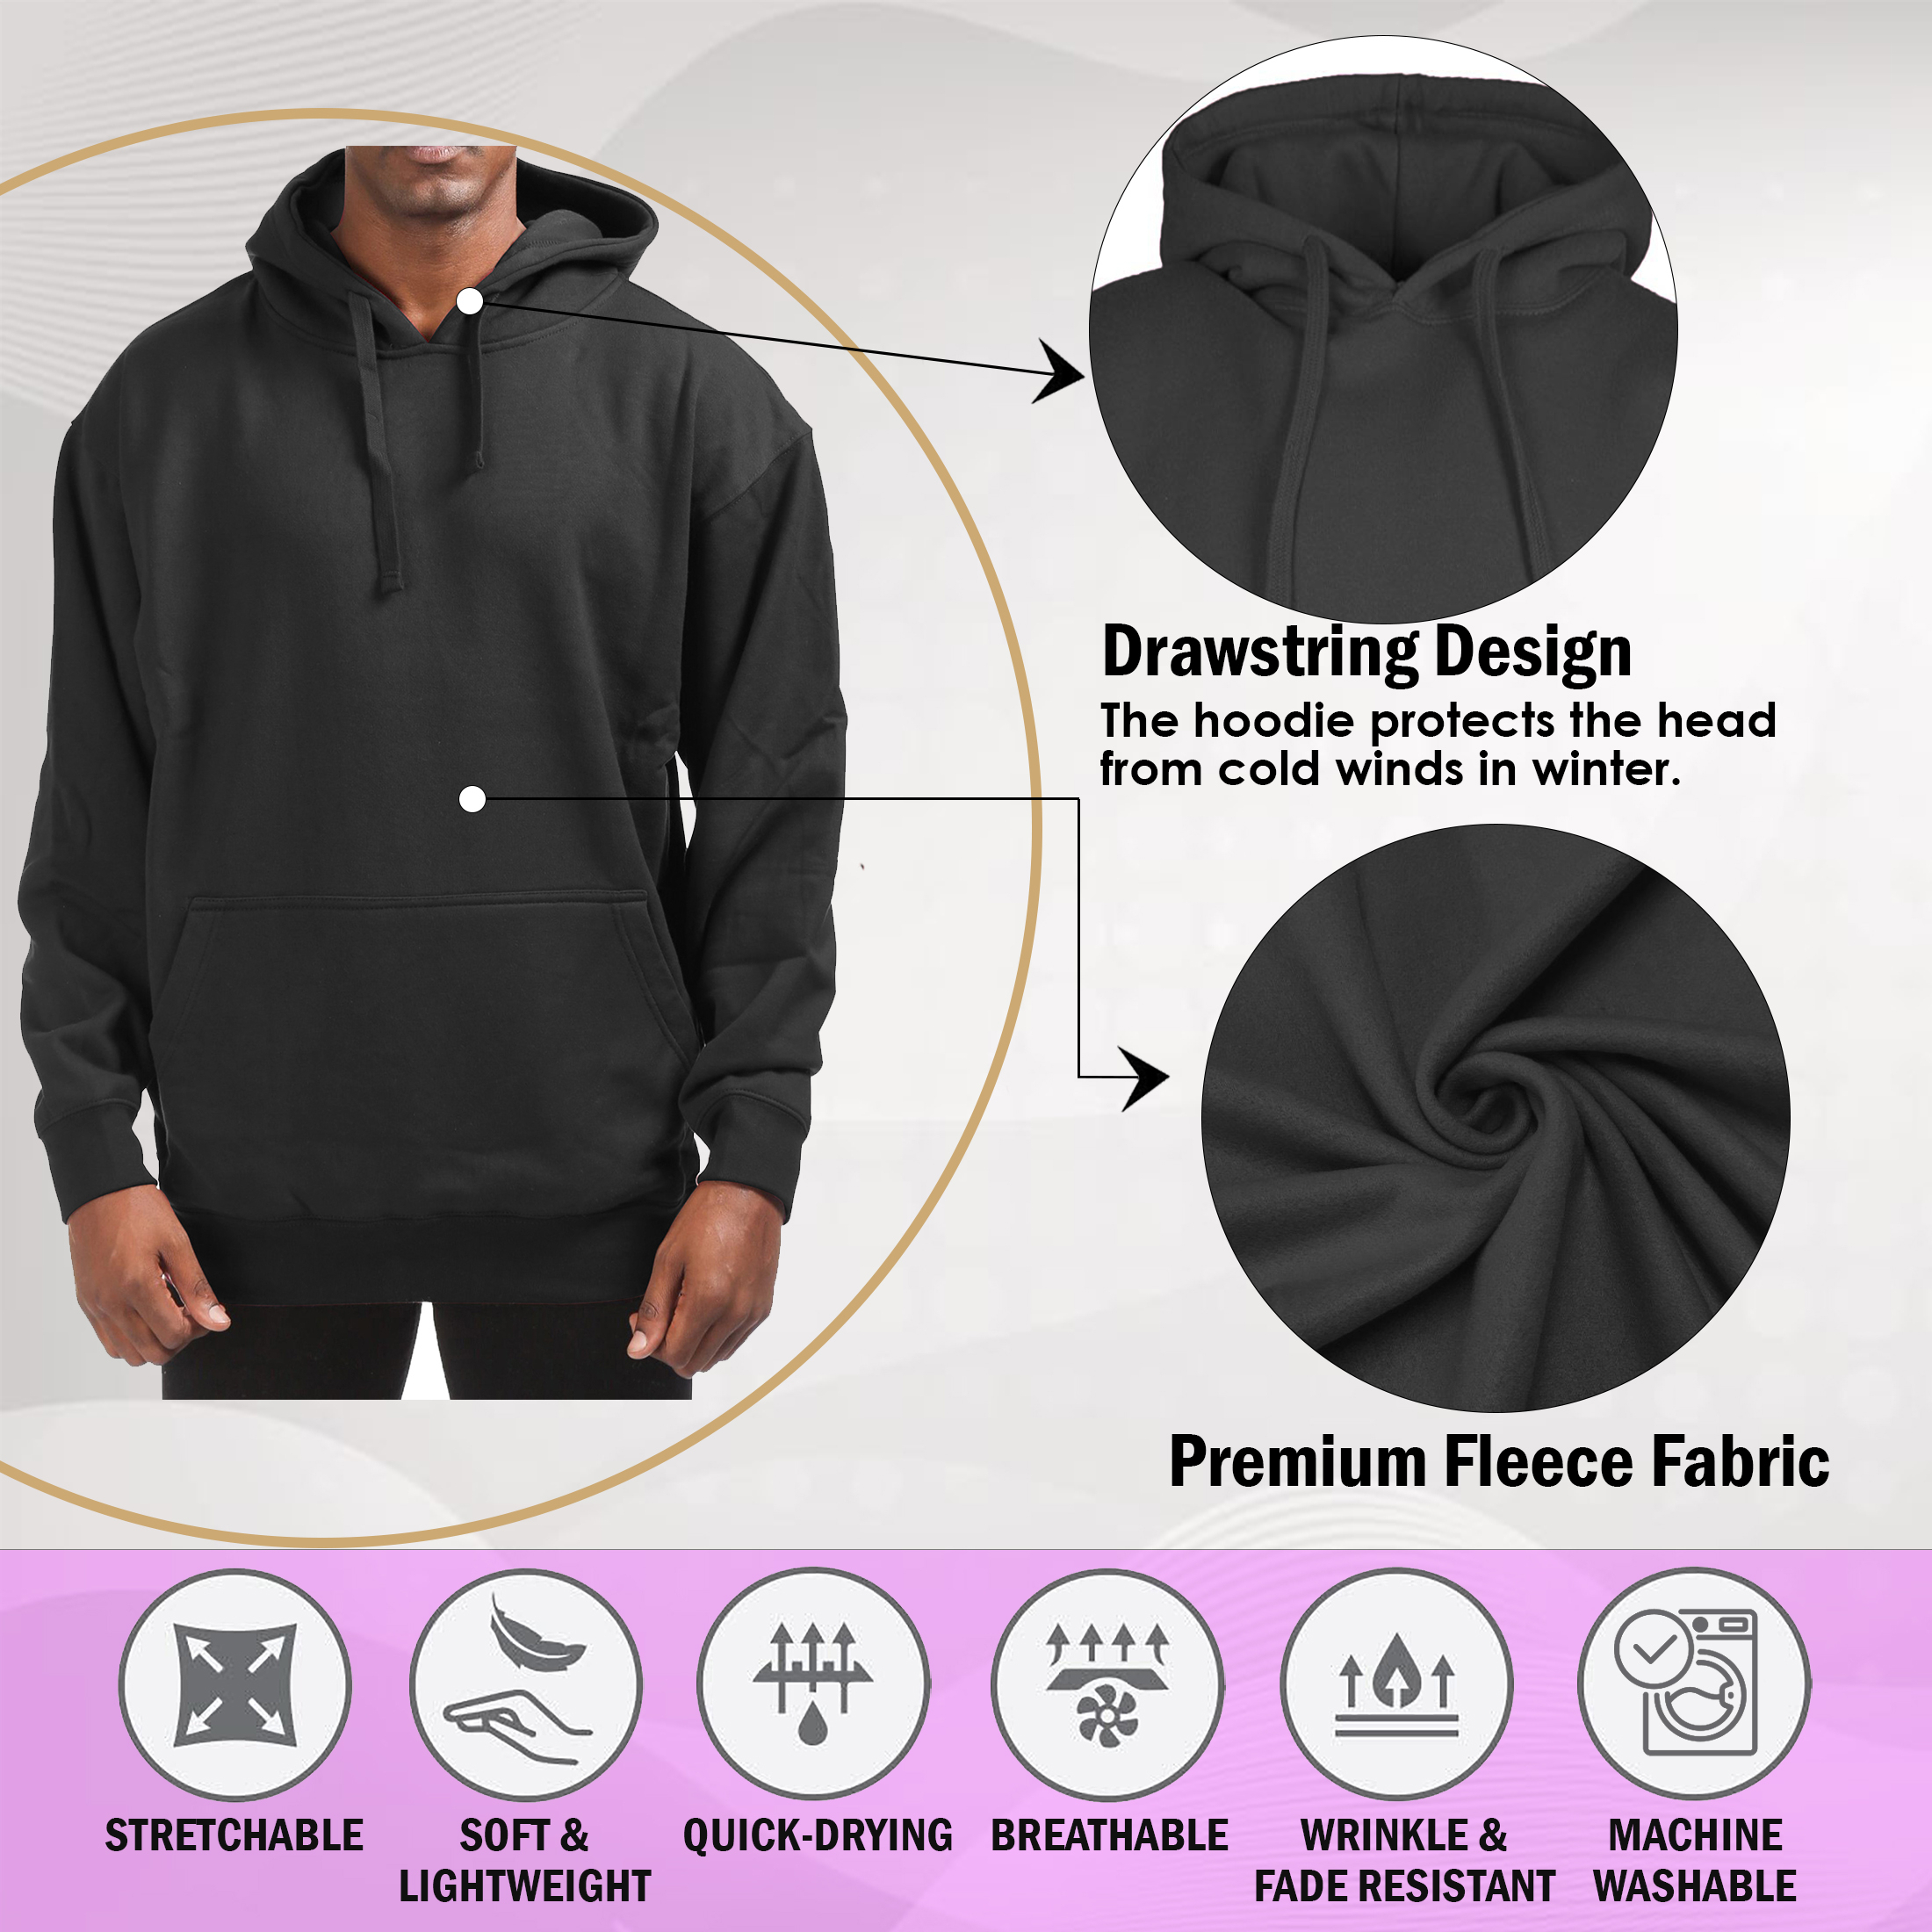 Men's Cotton-Blend Fleece Pullover Hoodie With Pocket (Big & Tall Sizes Available) - Olive, 3X-Large